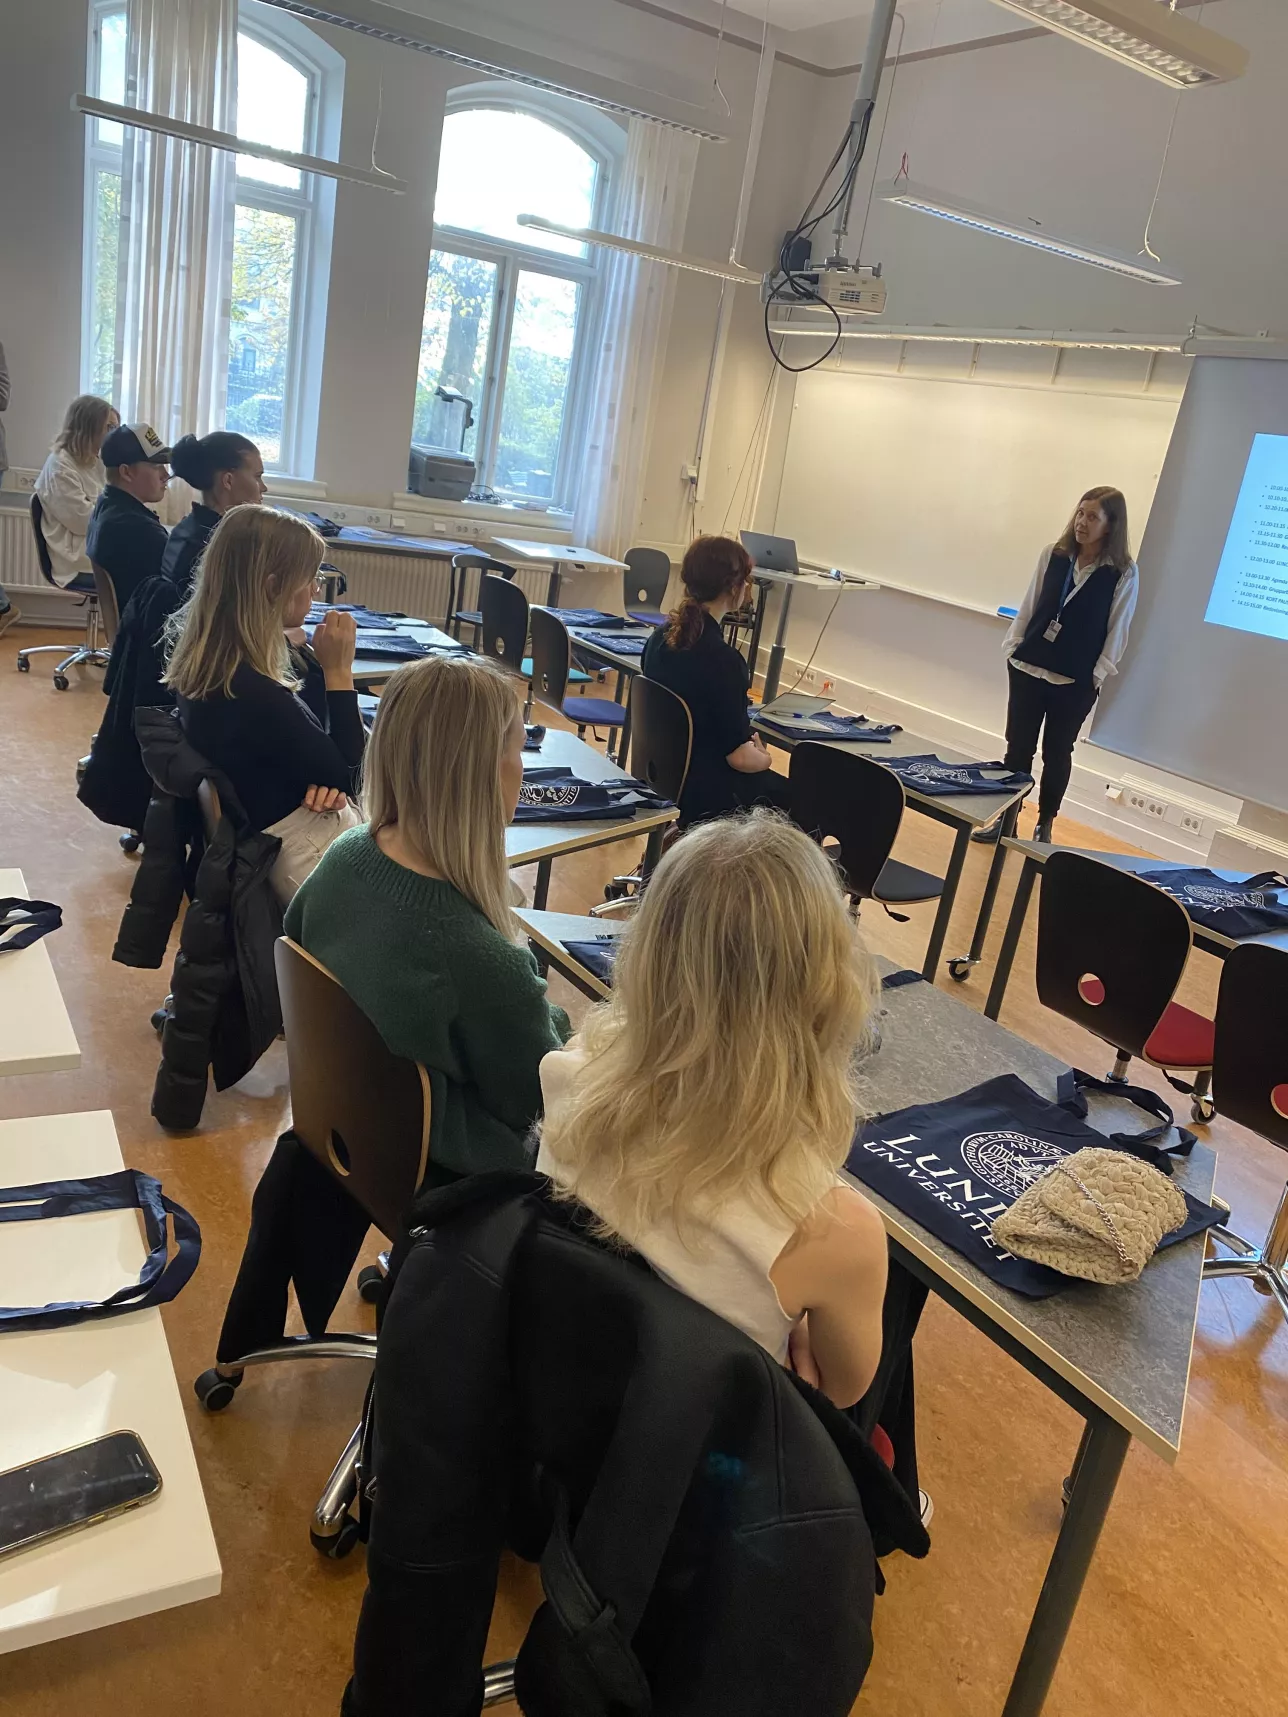 The faculty members of the Sociology of Law Department of Lund University, including Central Asian Law project team visited a school the Kullagymnasiet in Höganäs city. The visit took place on the 29th of October, 2021.  The purpose of the visit and meeting students was to talk about the Agenda 2030 and Social Sustainability issues with students of high school at Kullagymnasiet. The discussion also covered such issues as doing research in social sciences, which could be interesting for students’ later caree